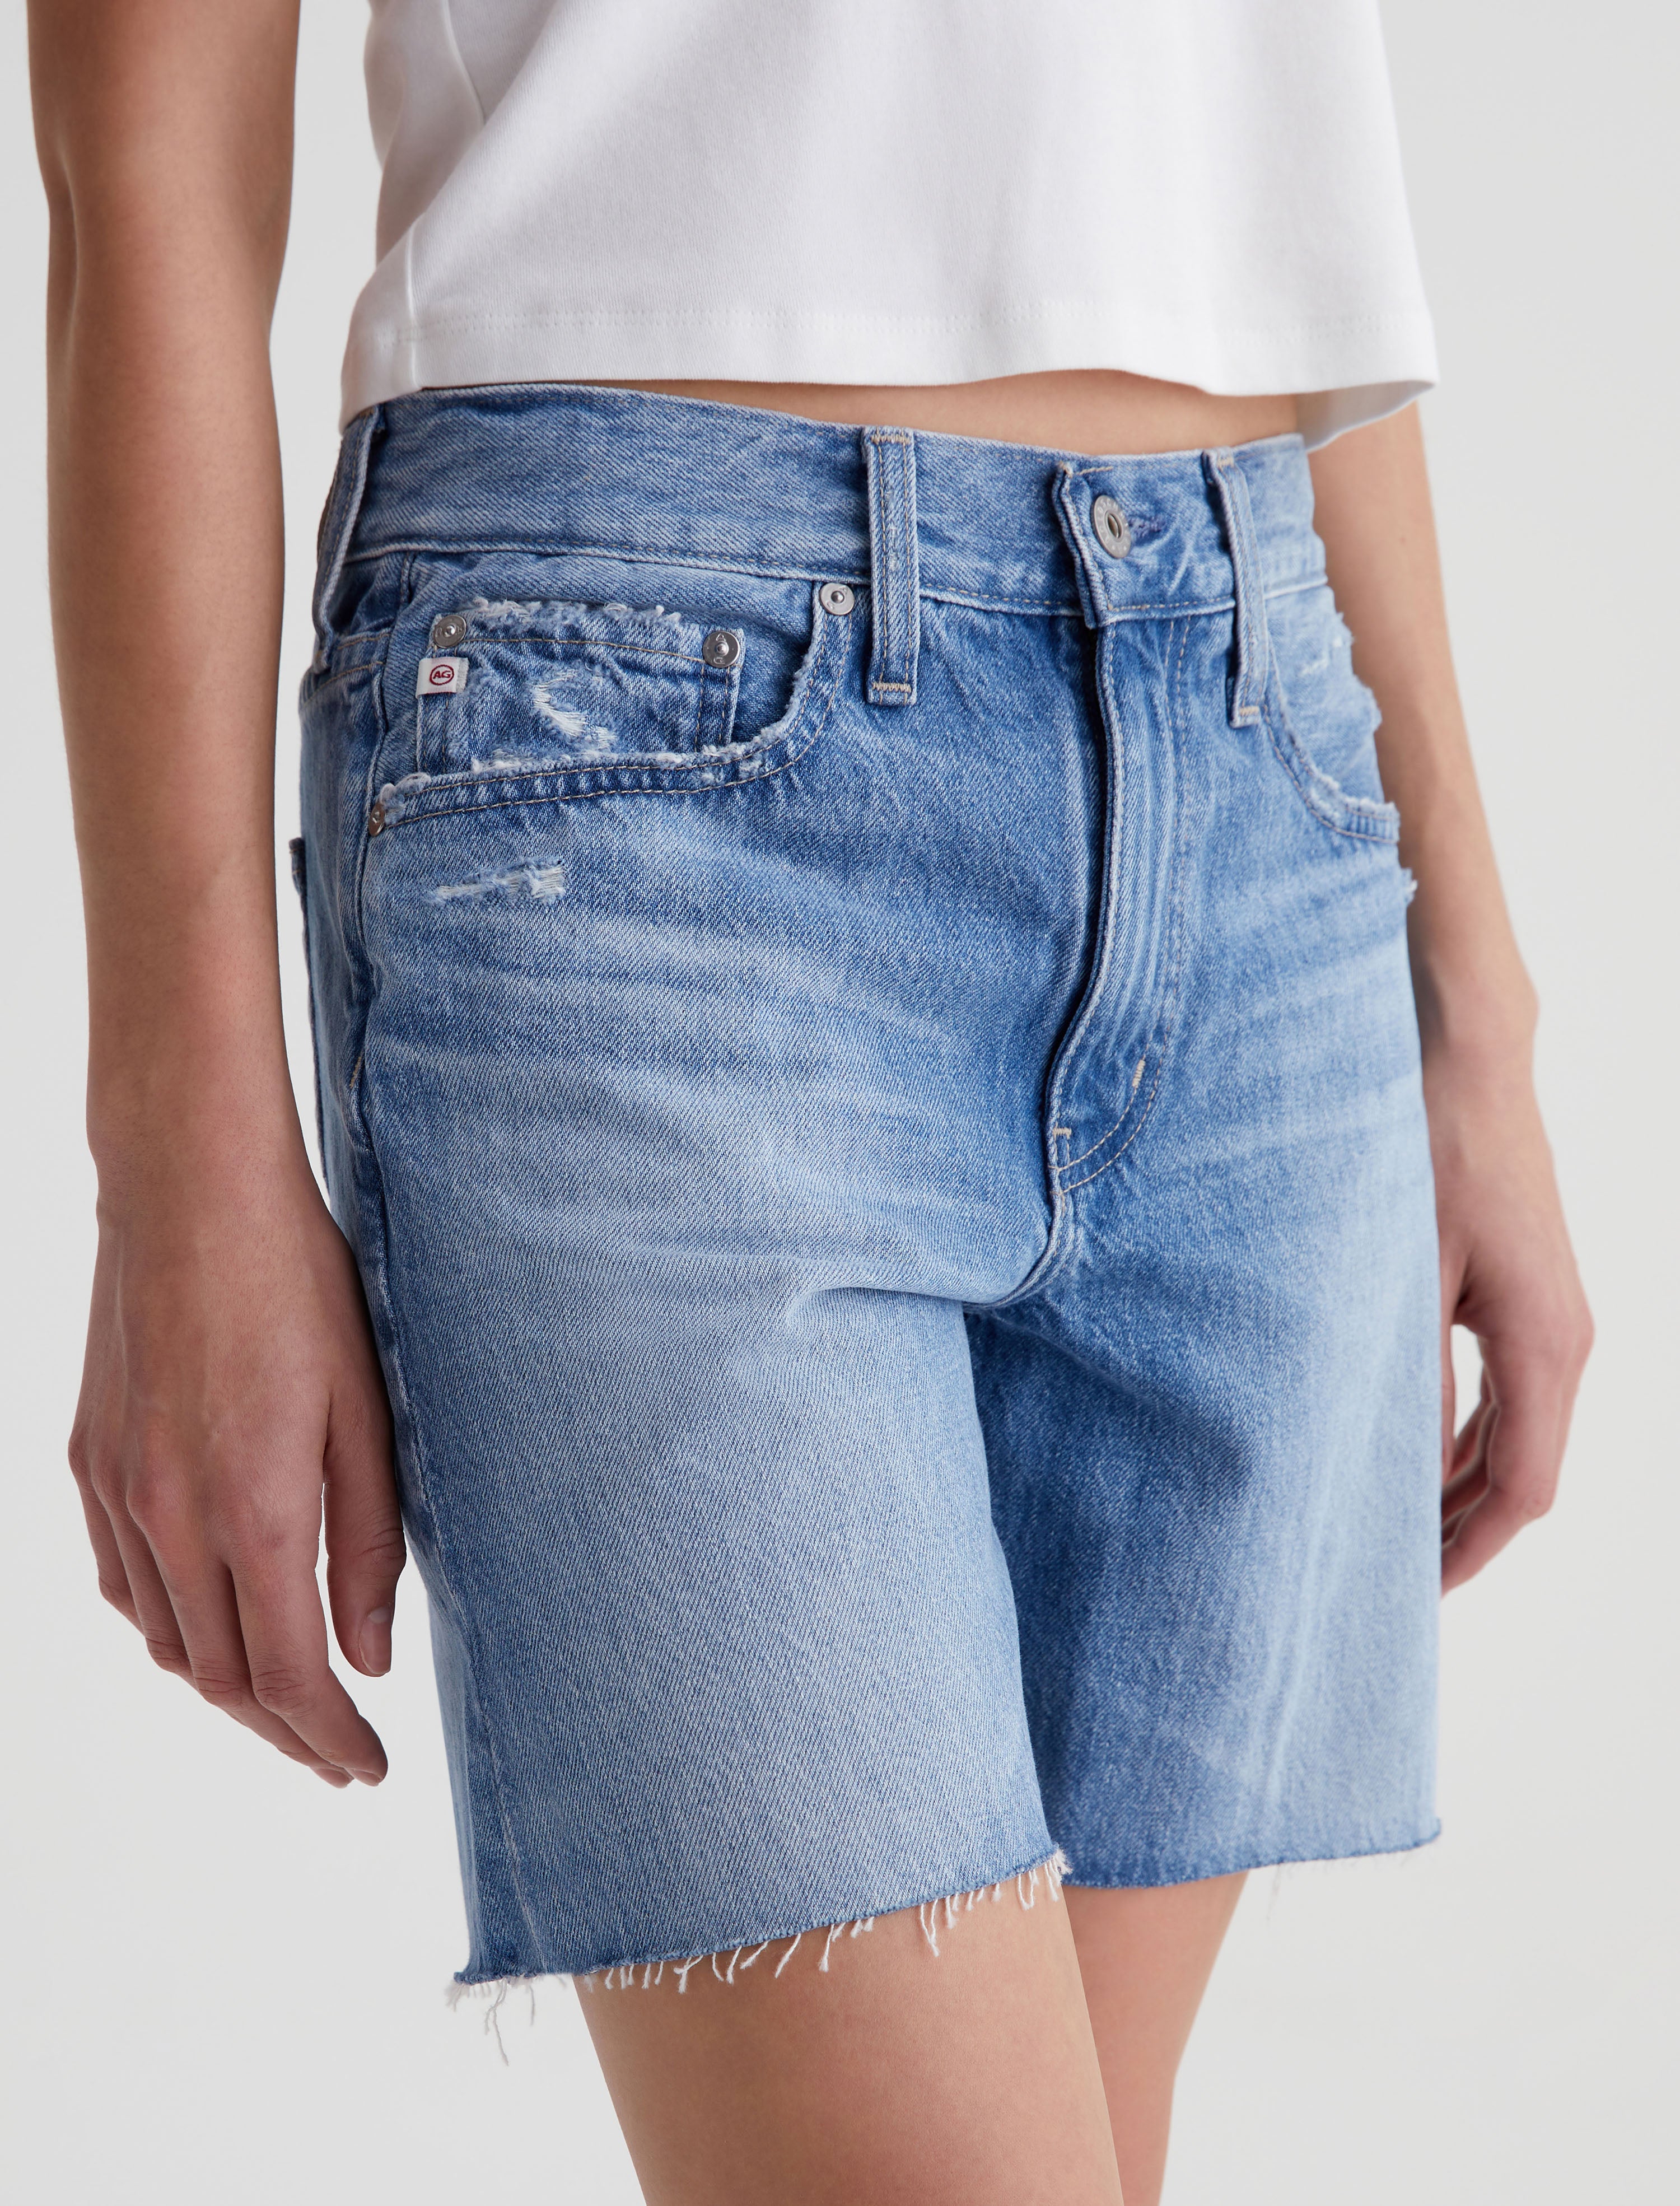 Womens Nikki Short 1 Year Classic White at AG Jeans Official Store